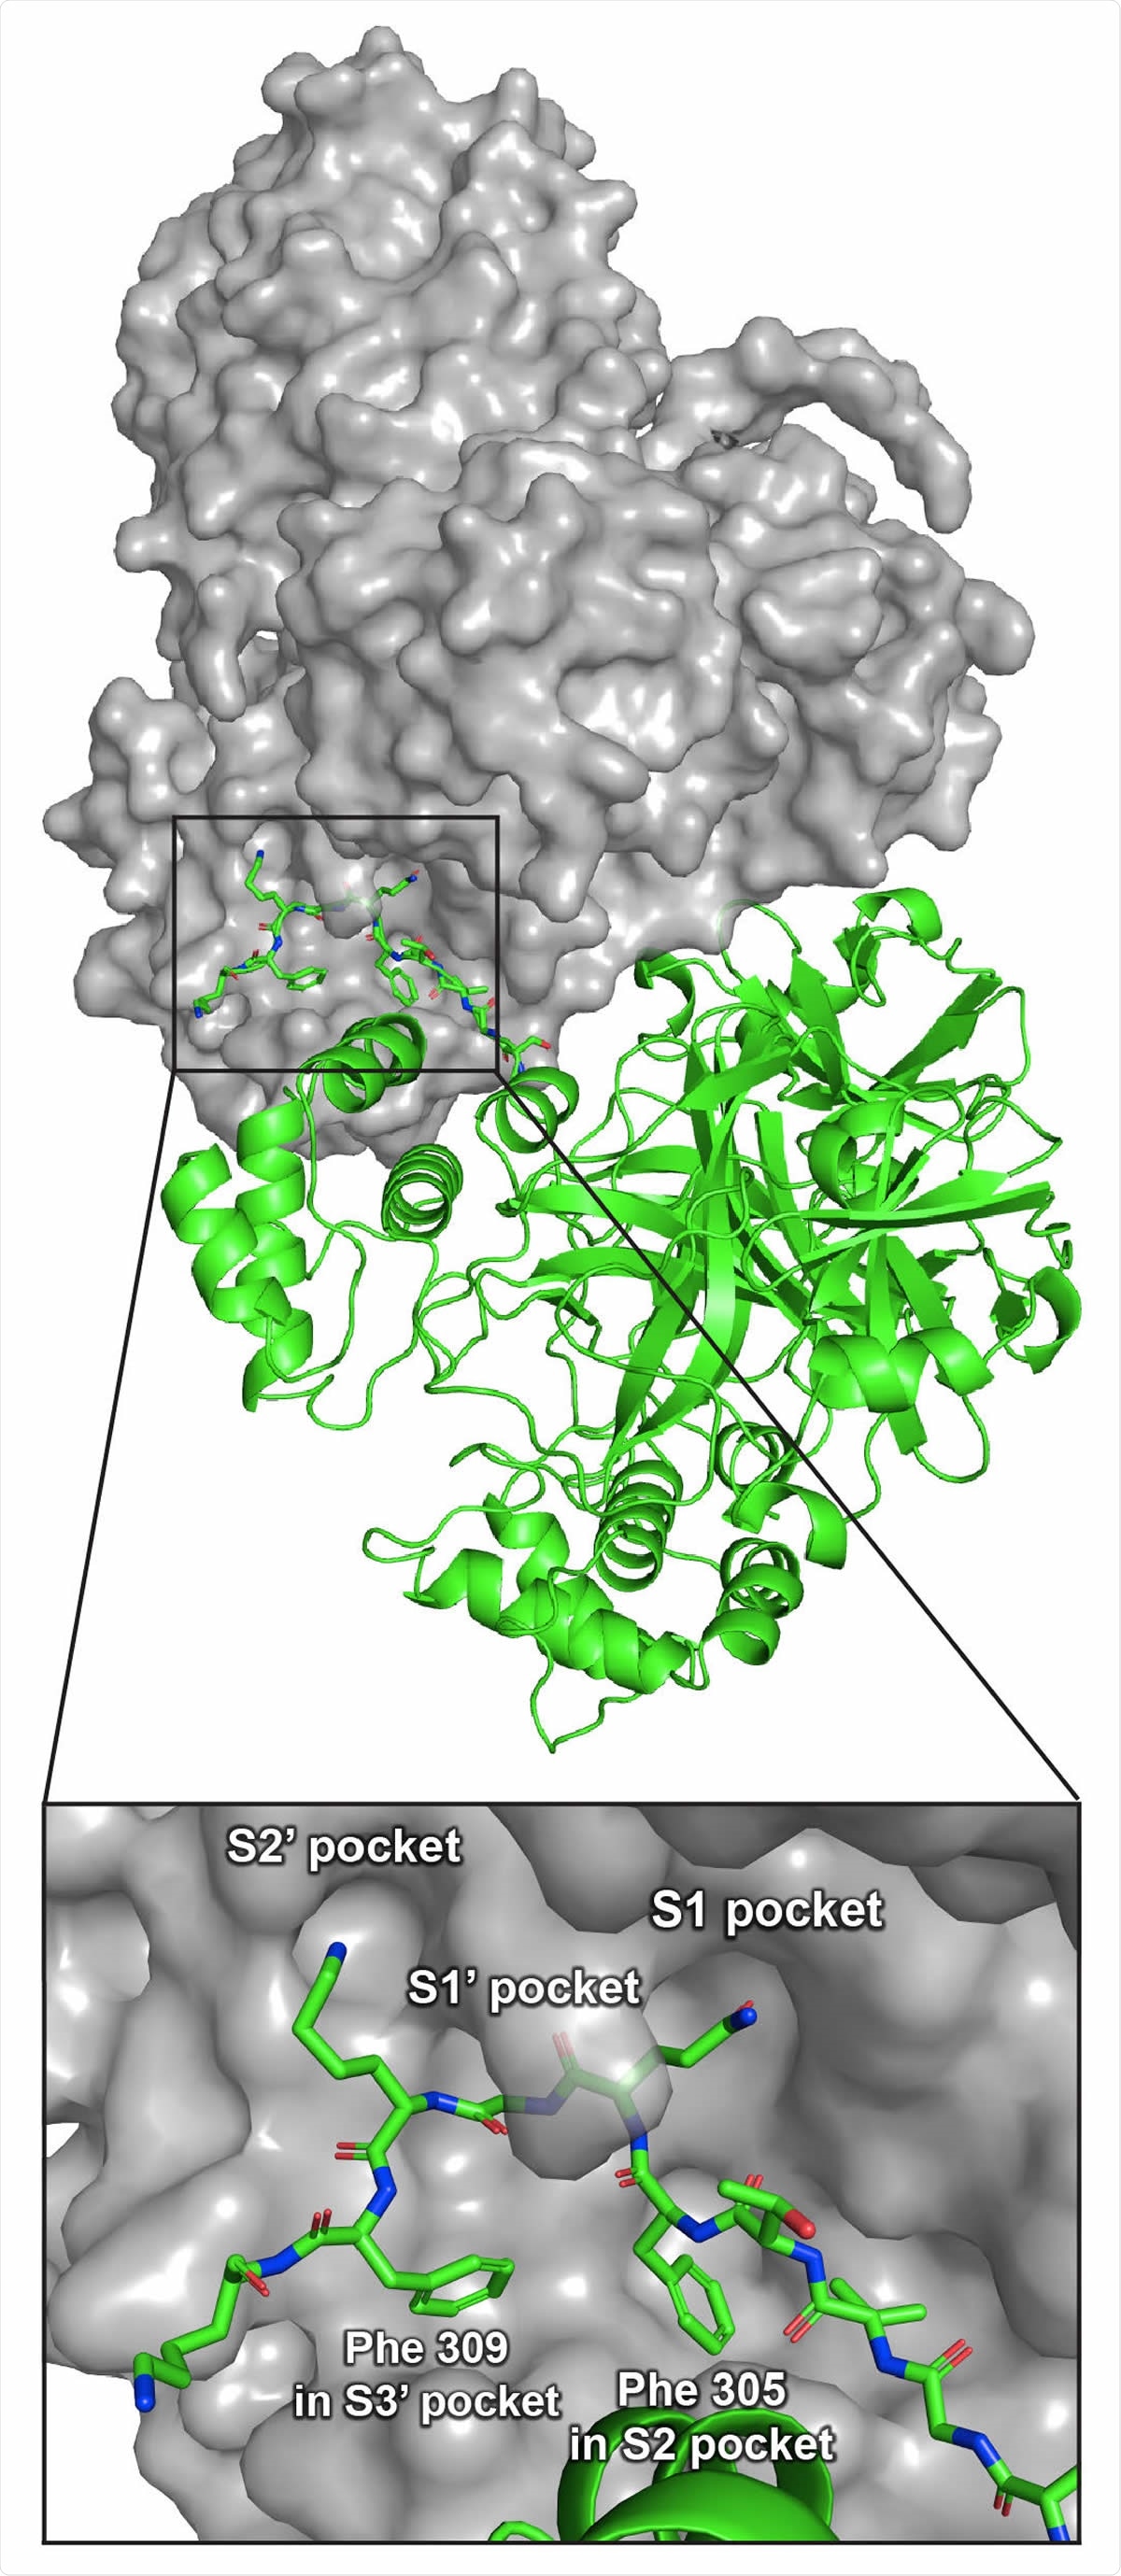 Crystal structure of Mpro 316 showing two Mpro 316 dimers in two adjacent asymmetric units (PDB 5B6O). One dimer is shown in grey surface view; the other dimer is shown in green cartoons. The inset shows a detailed view of C-terminal residues 301–310 of the C-terminal autolytic cleavage site of one Mpro 316 molecule in the active site of another Mpro 316 molecule.